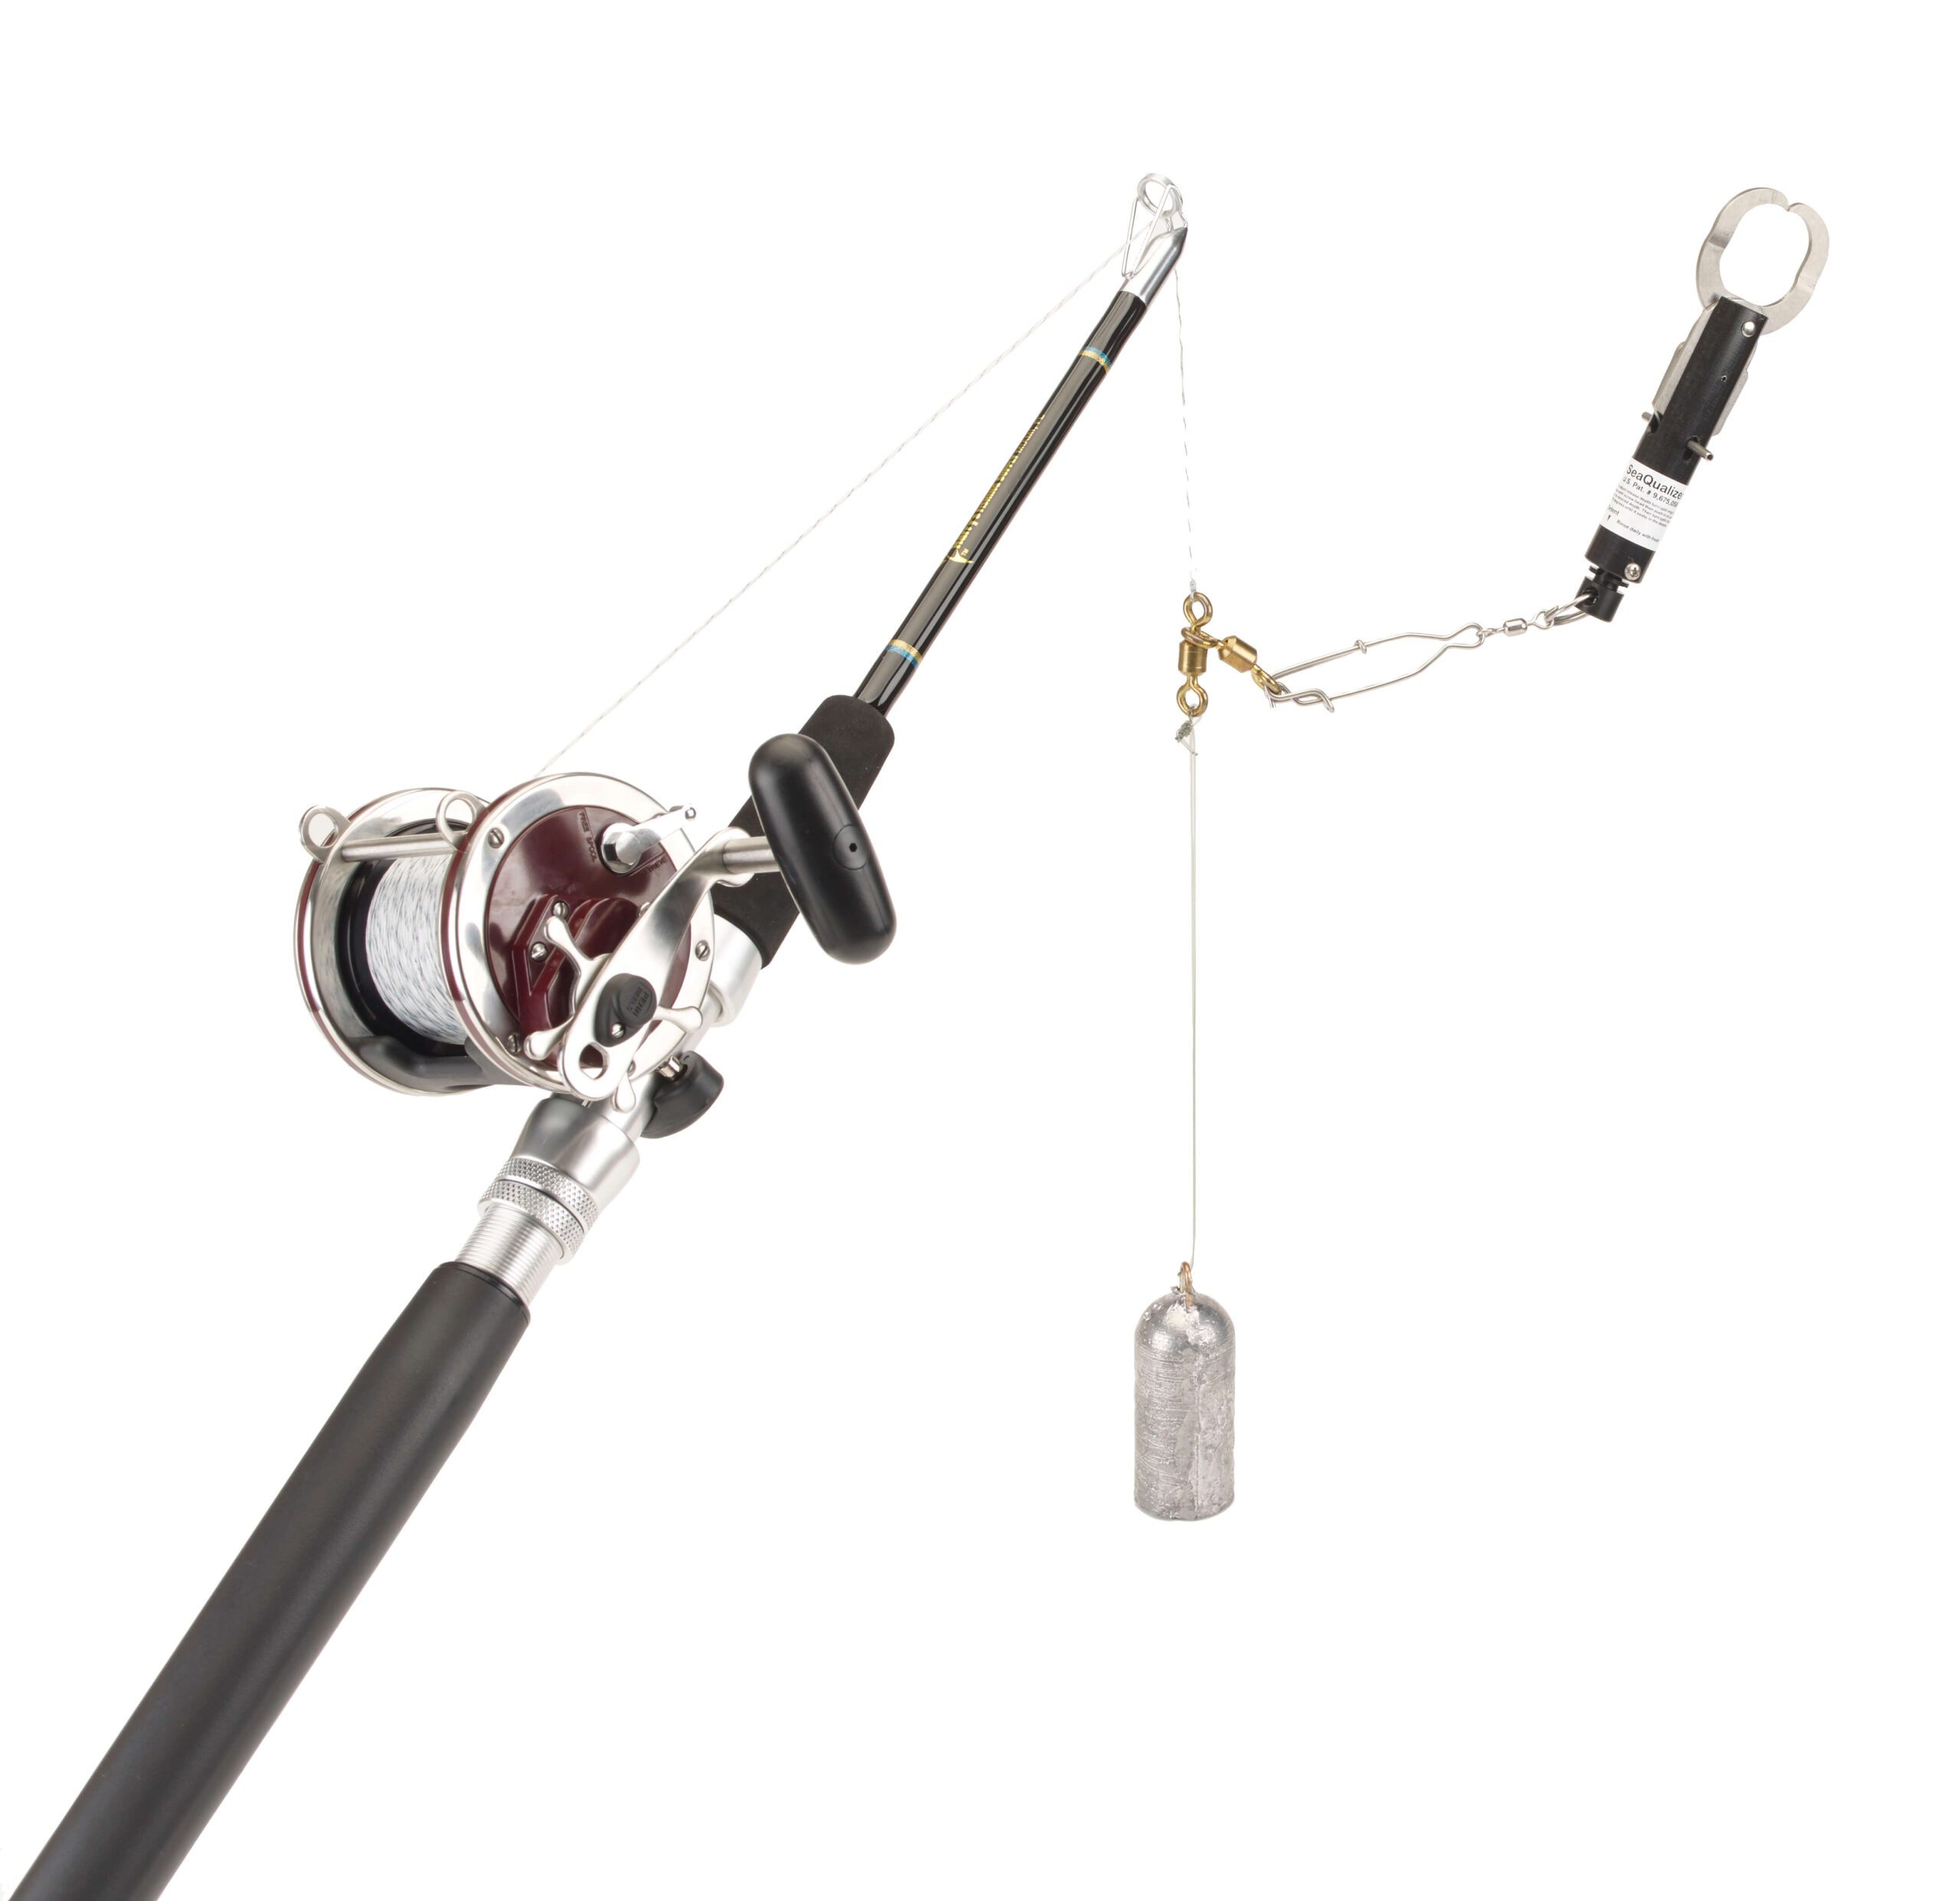 SeaQualizer Rod and Reel Release Bundle